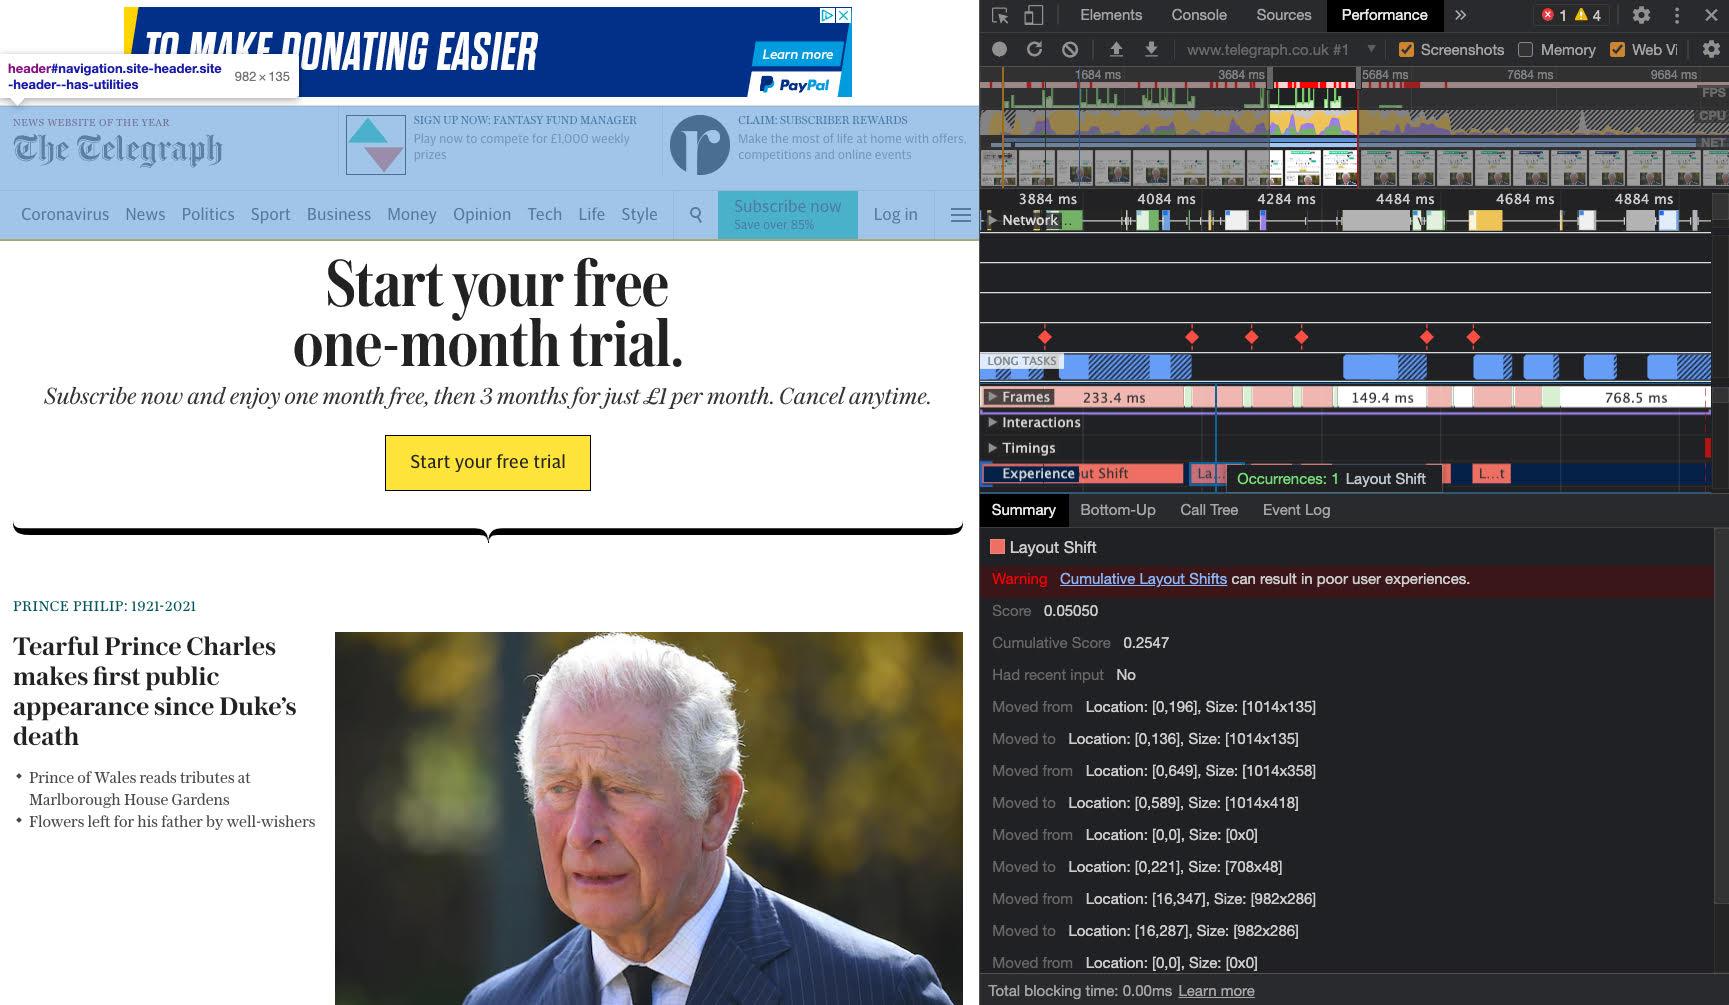 The front page of Telegraph with an ad in the header highlughted with a blue overlay.